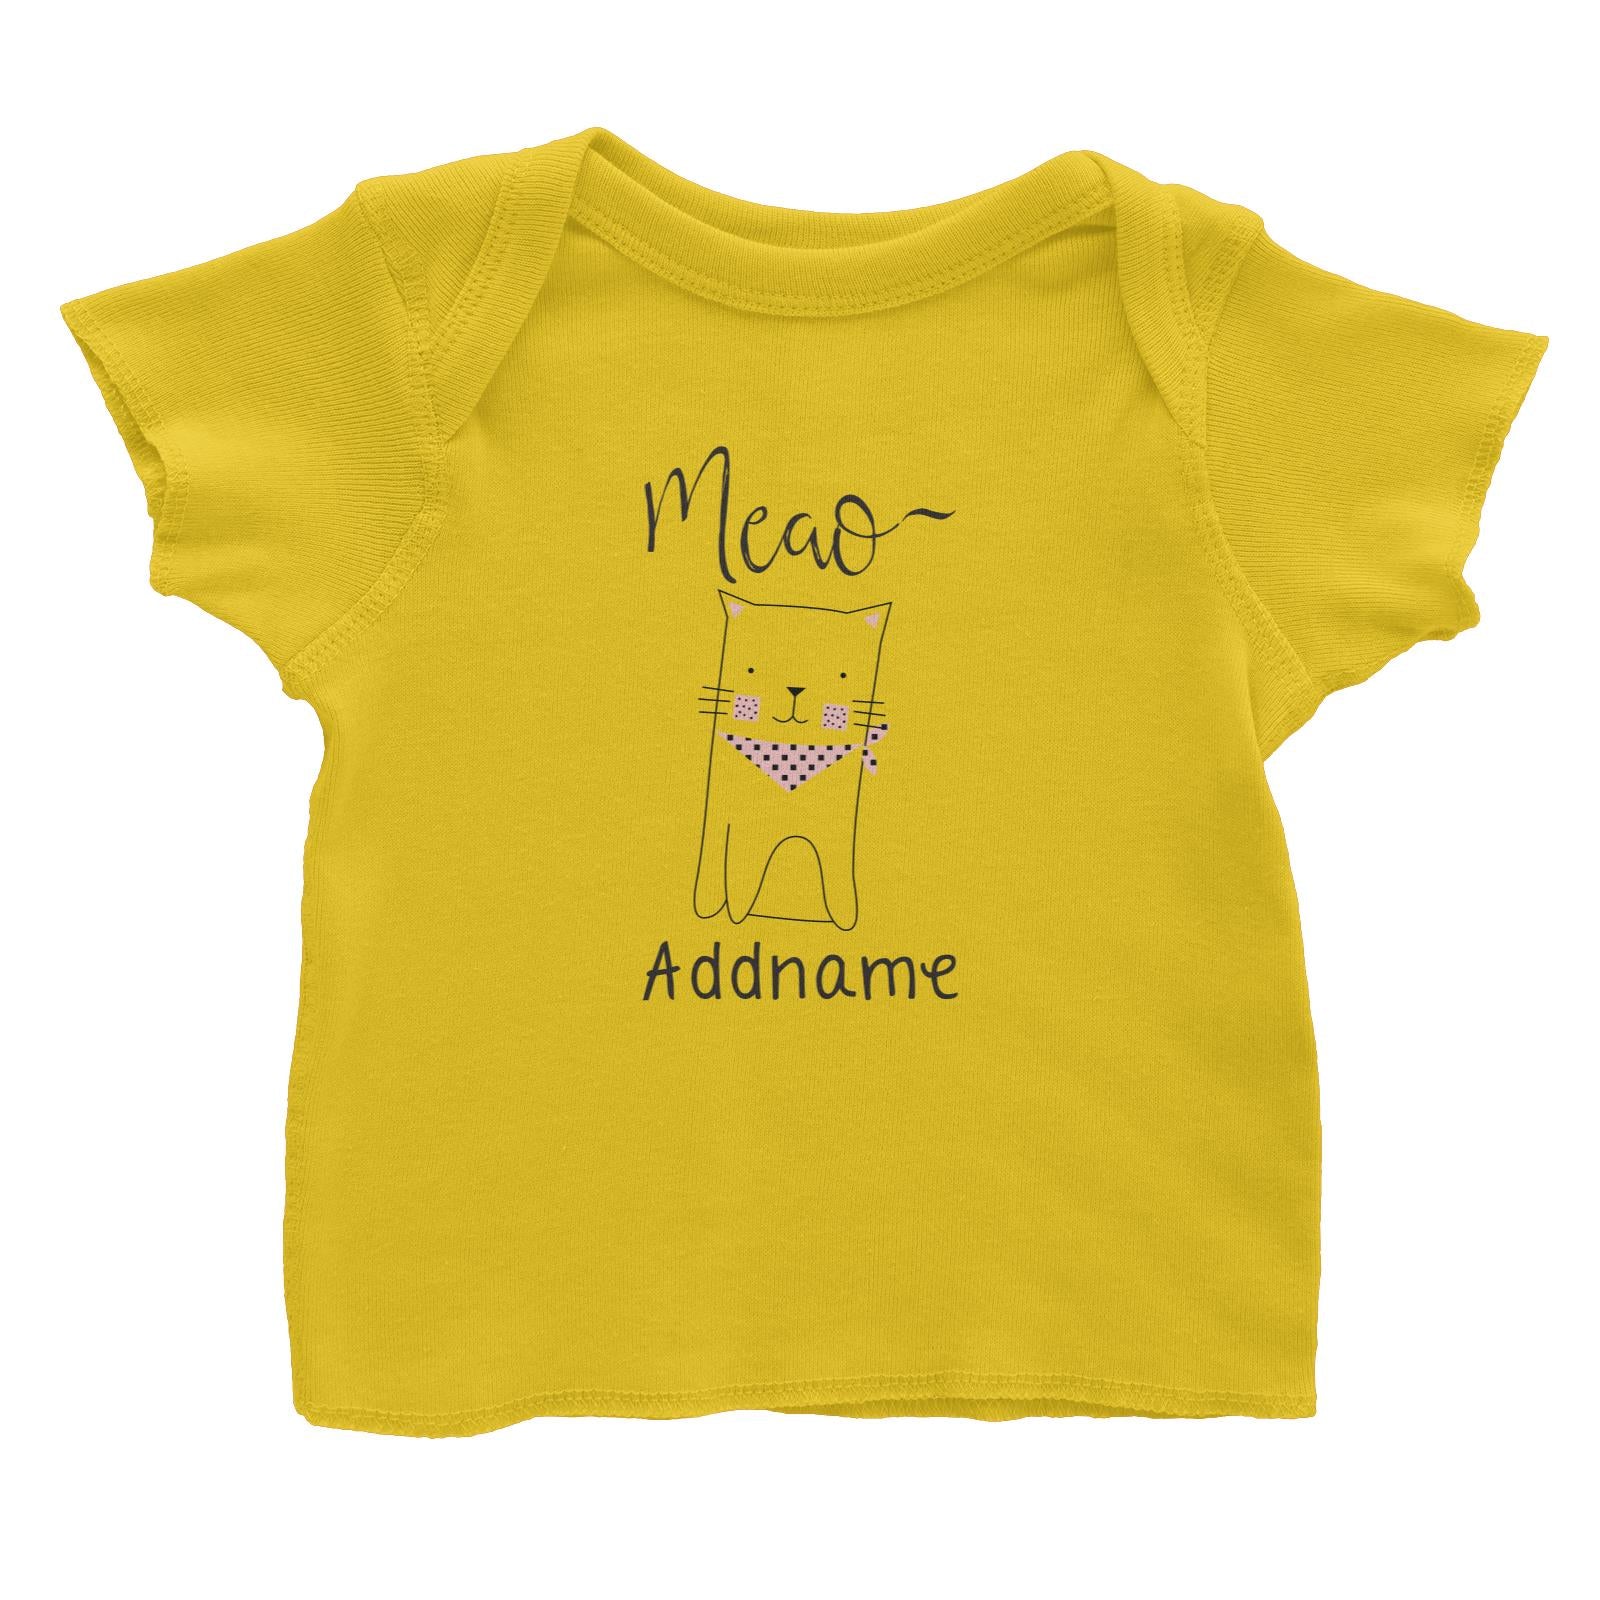 Cute Animals and Friends Series 2 Cat Meow Addname Baby T-Shirt